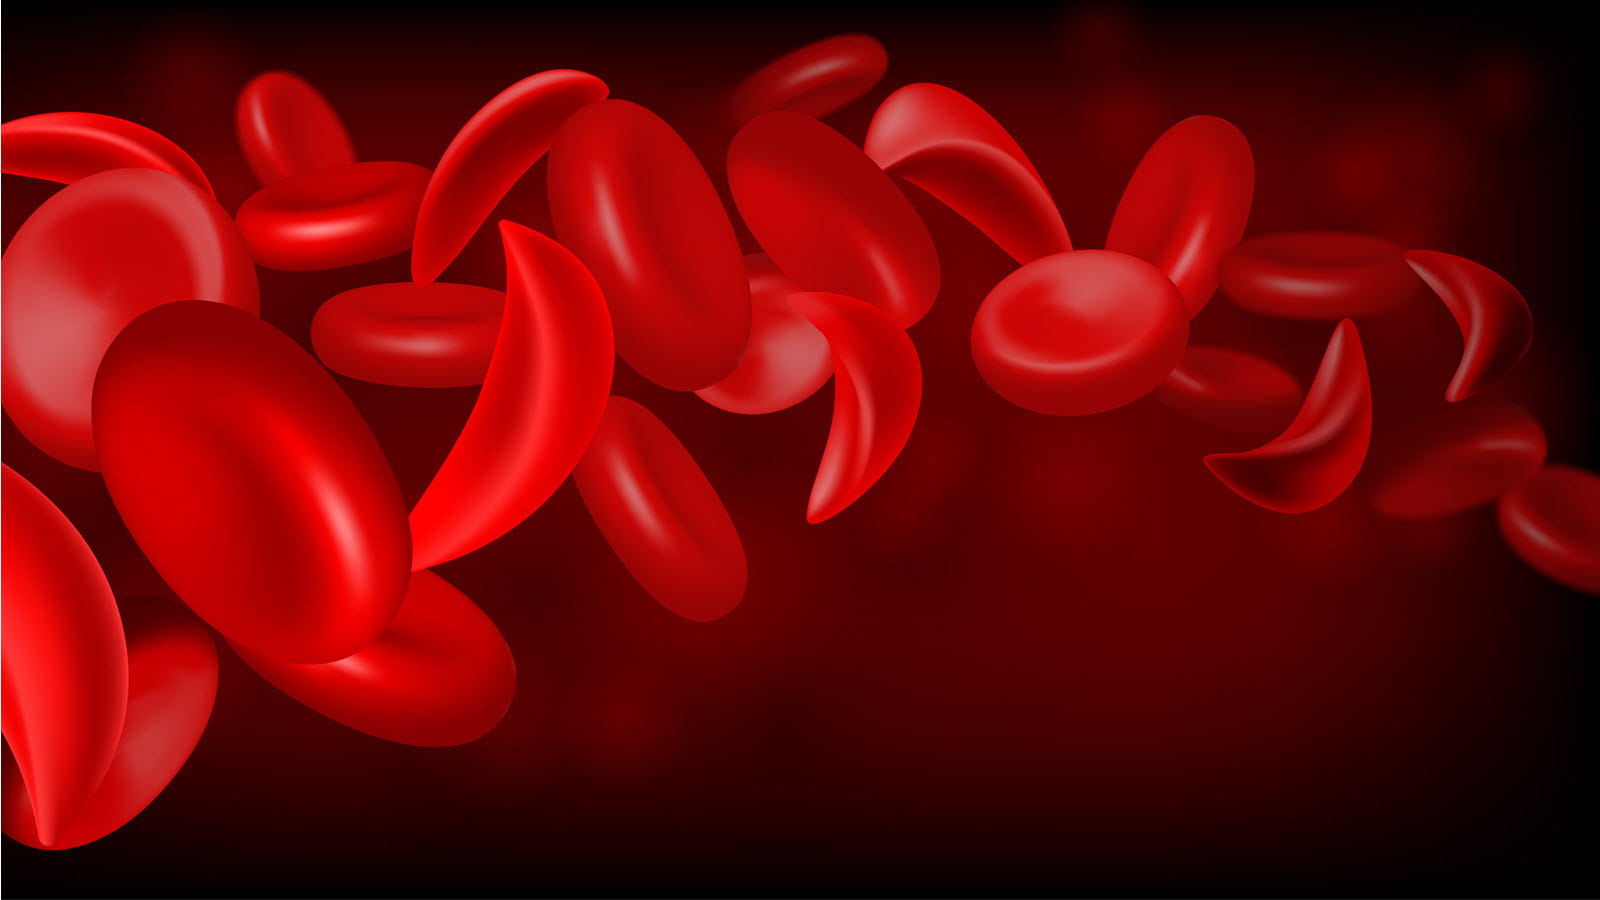 An illustration of normal blood cells along with half-moon-shaped sickle cells